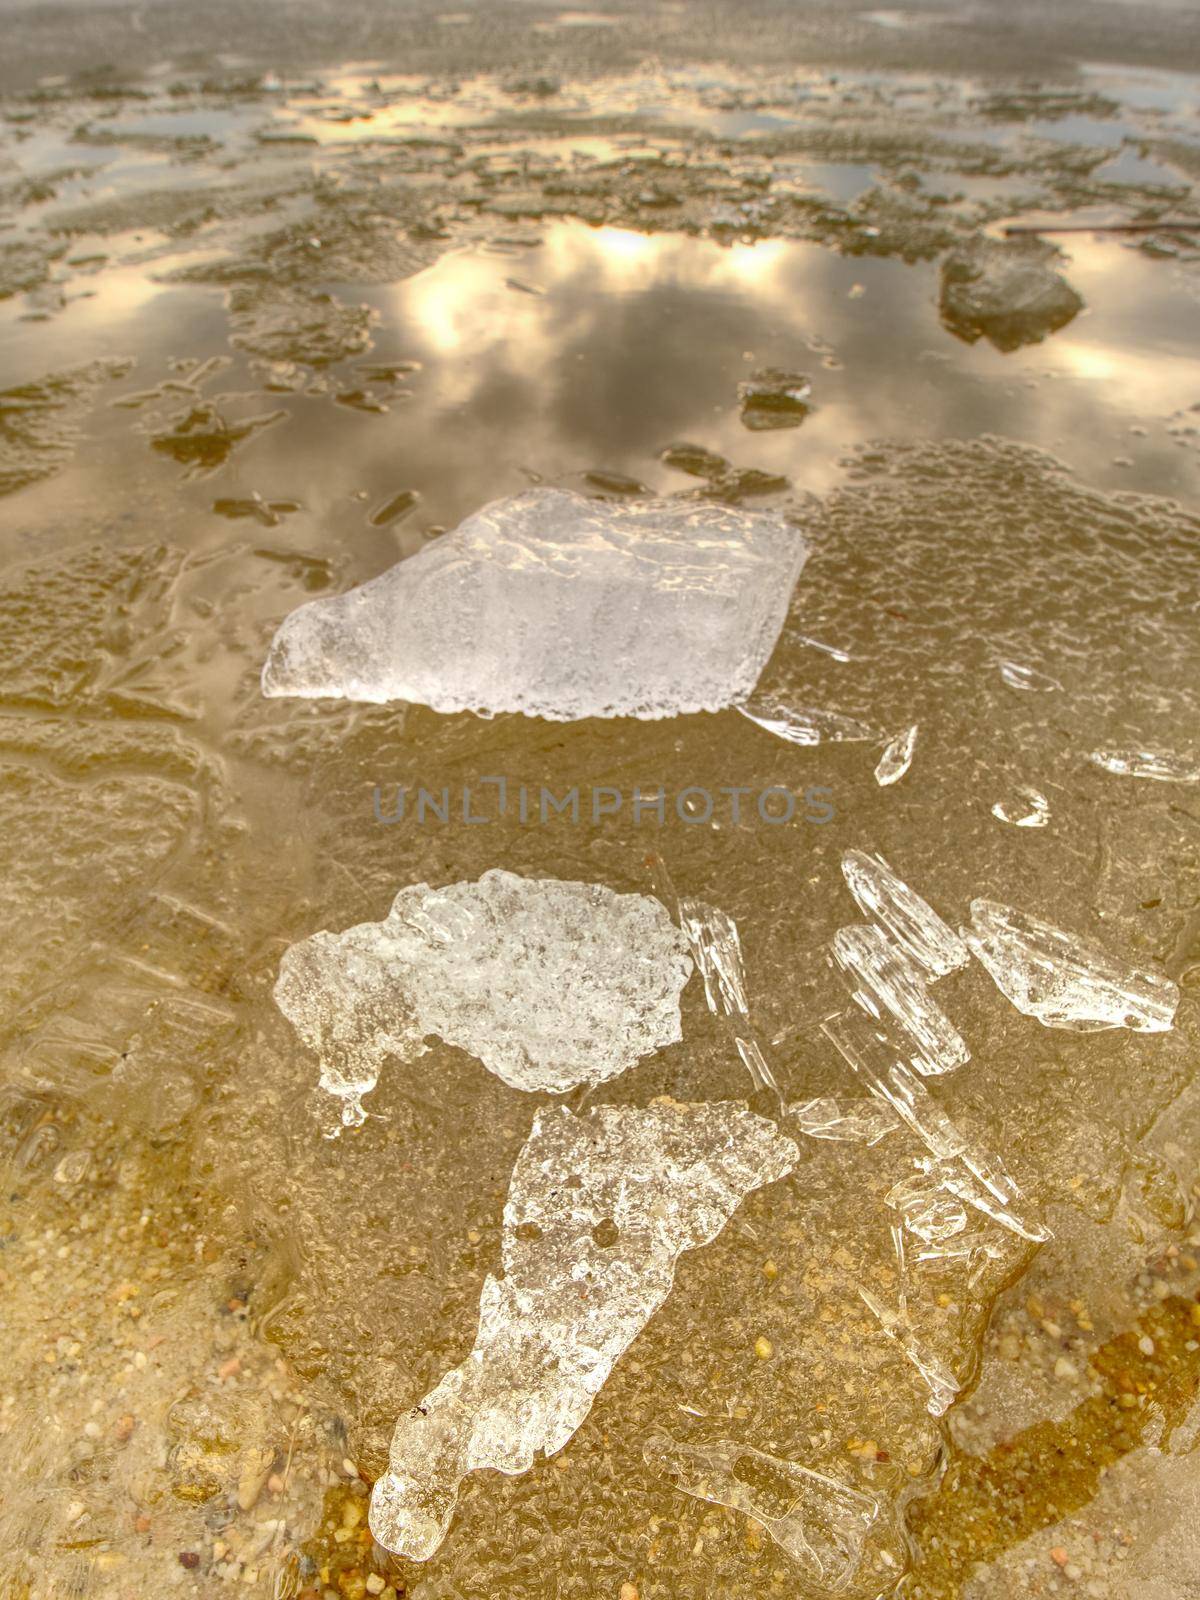 Winter natural wonder. Yellow pieces of snow melting on beach. Wonderful nature c by rdonar2